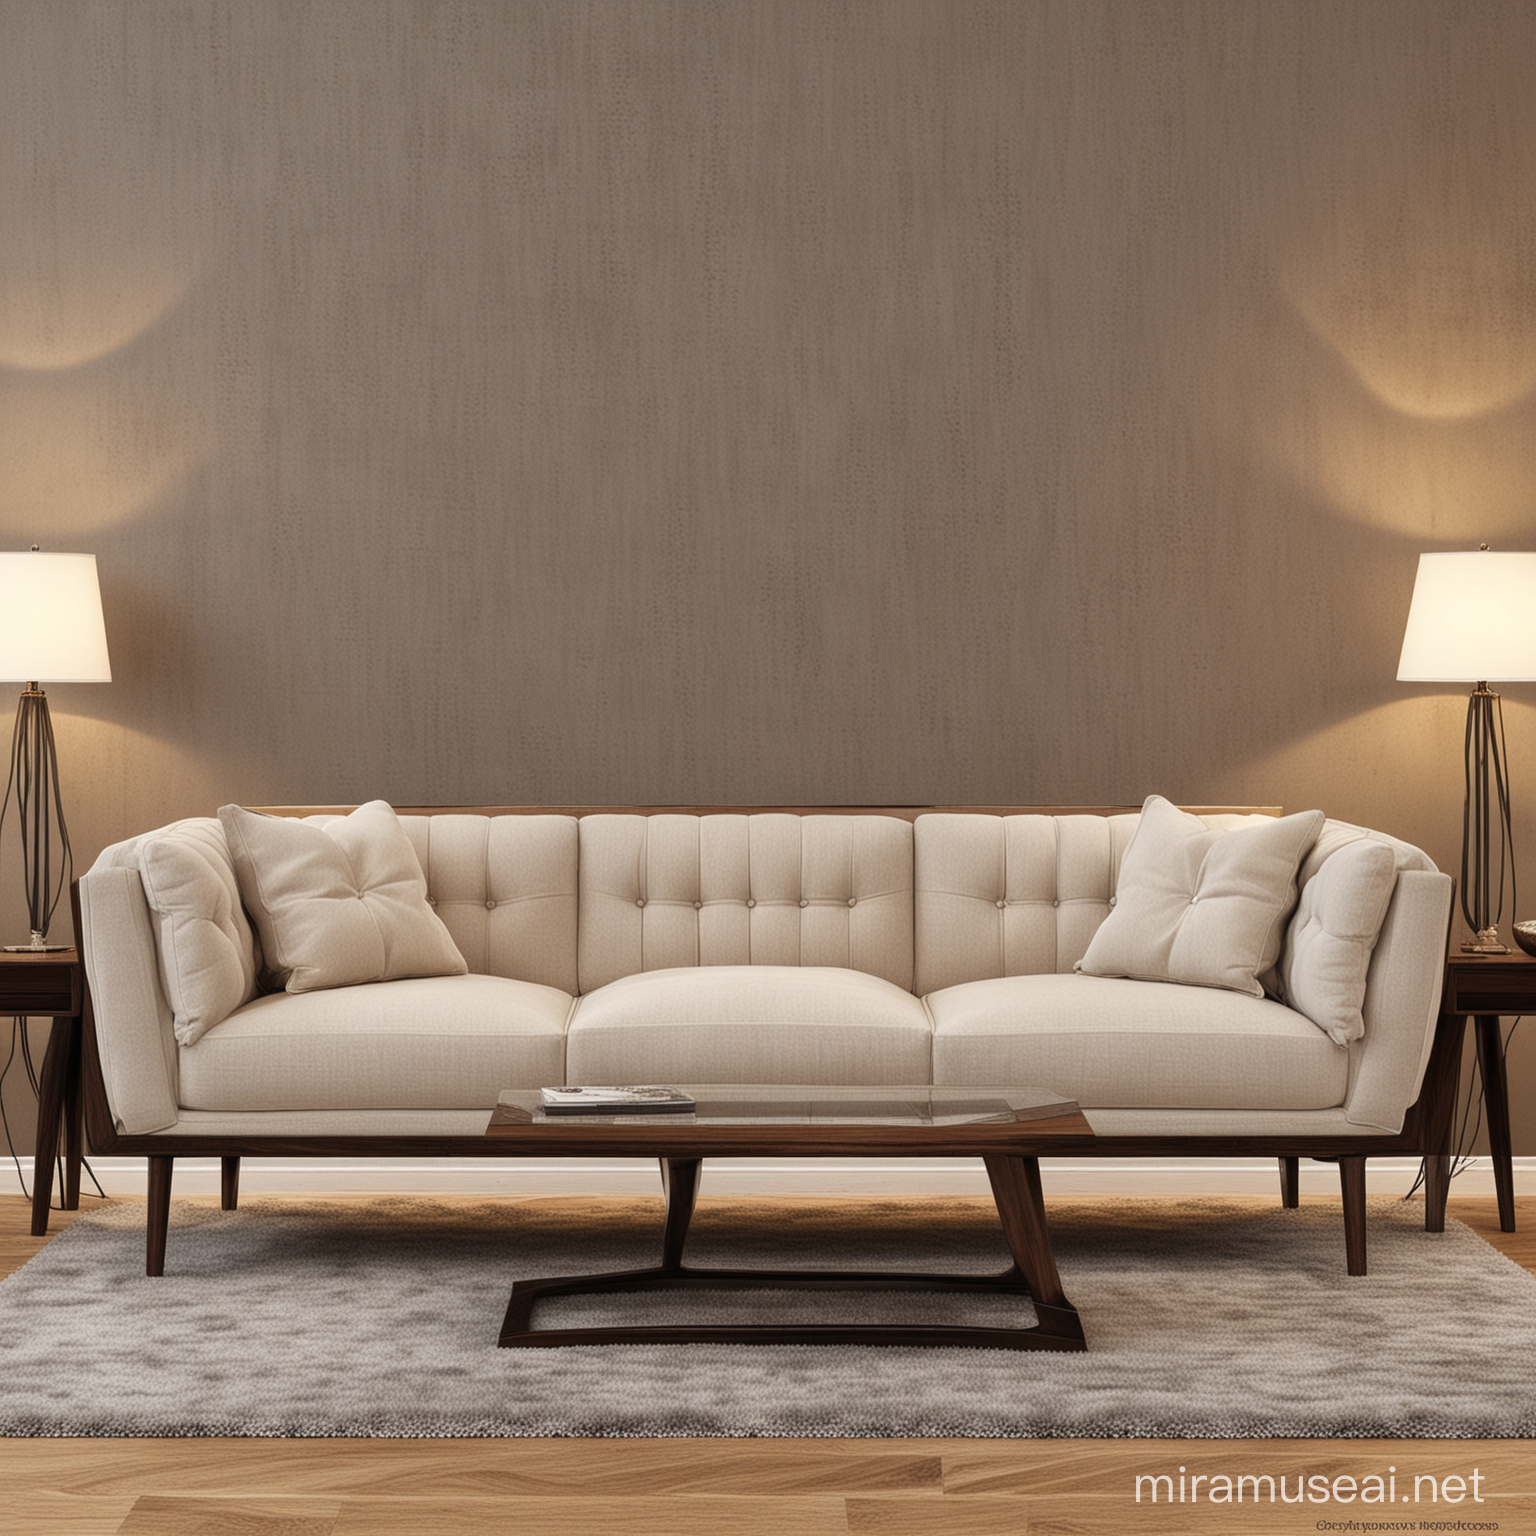 Luxurious Living Room Sofa Set with Wooden Accents